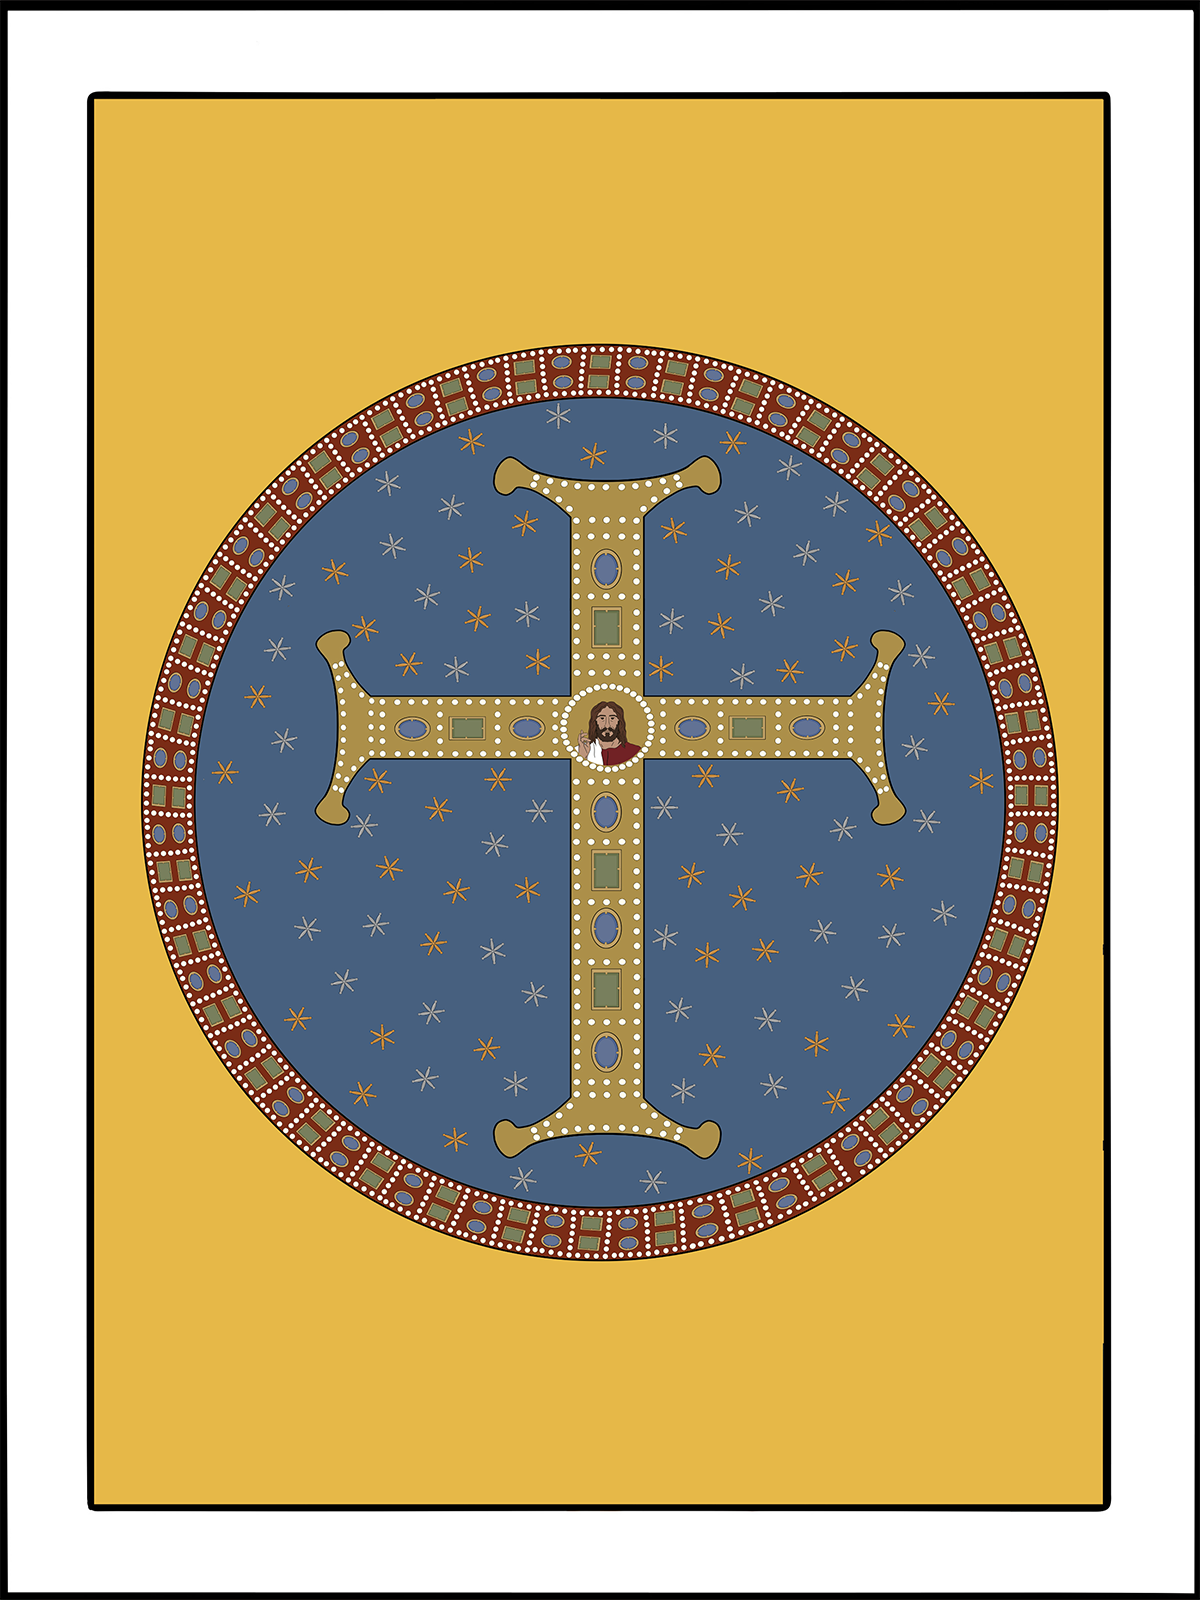 0914: Holy Cross Day